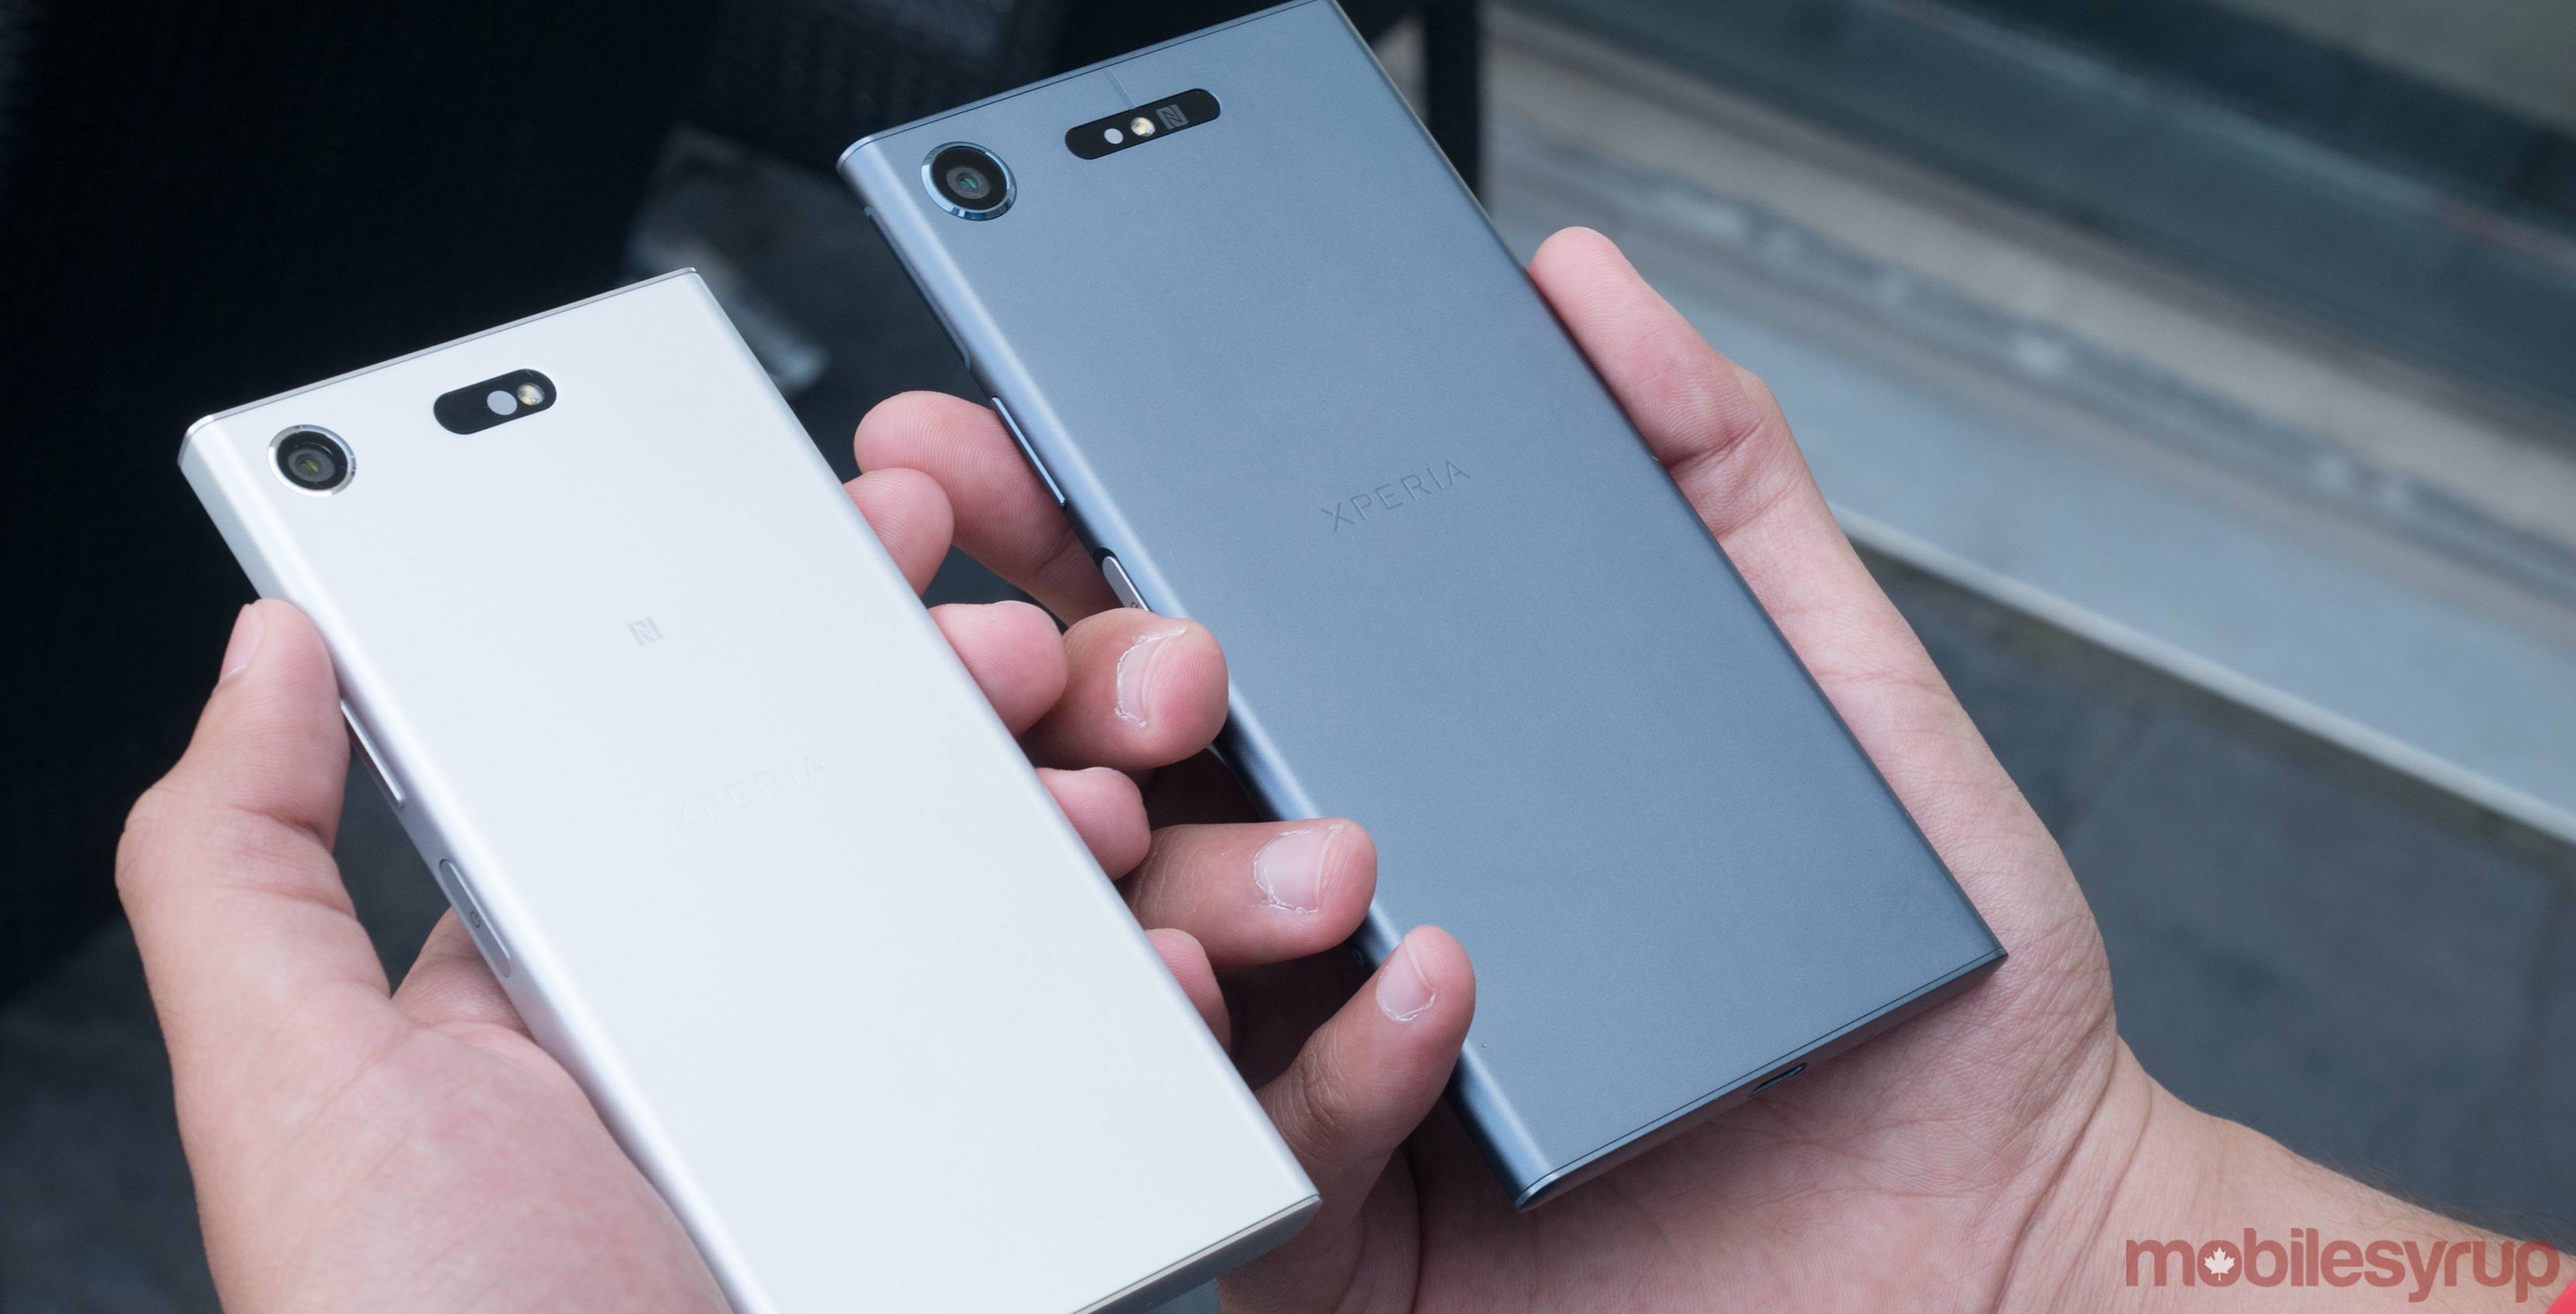 Sony Xperia XZ1 and XZ1 Compact side by side